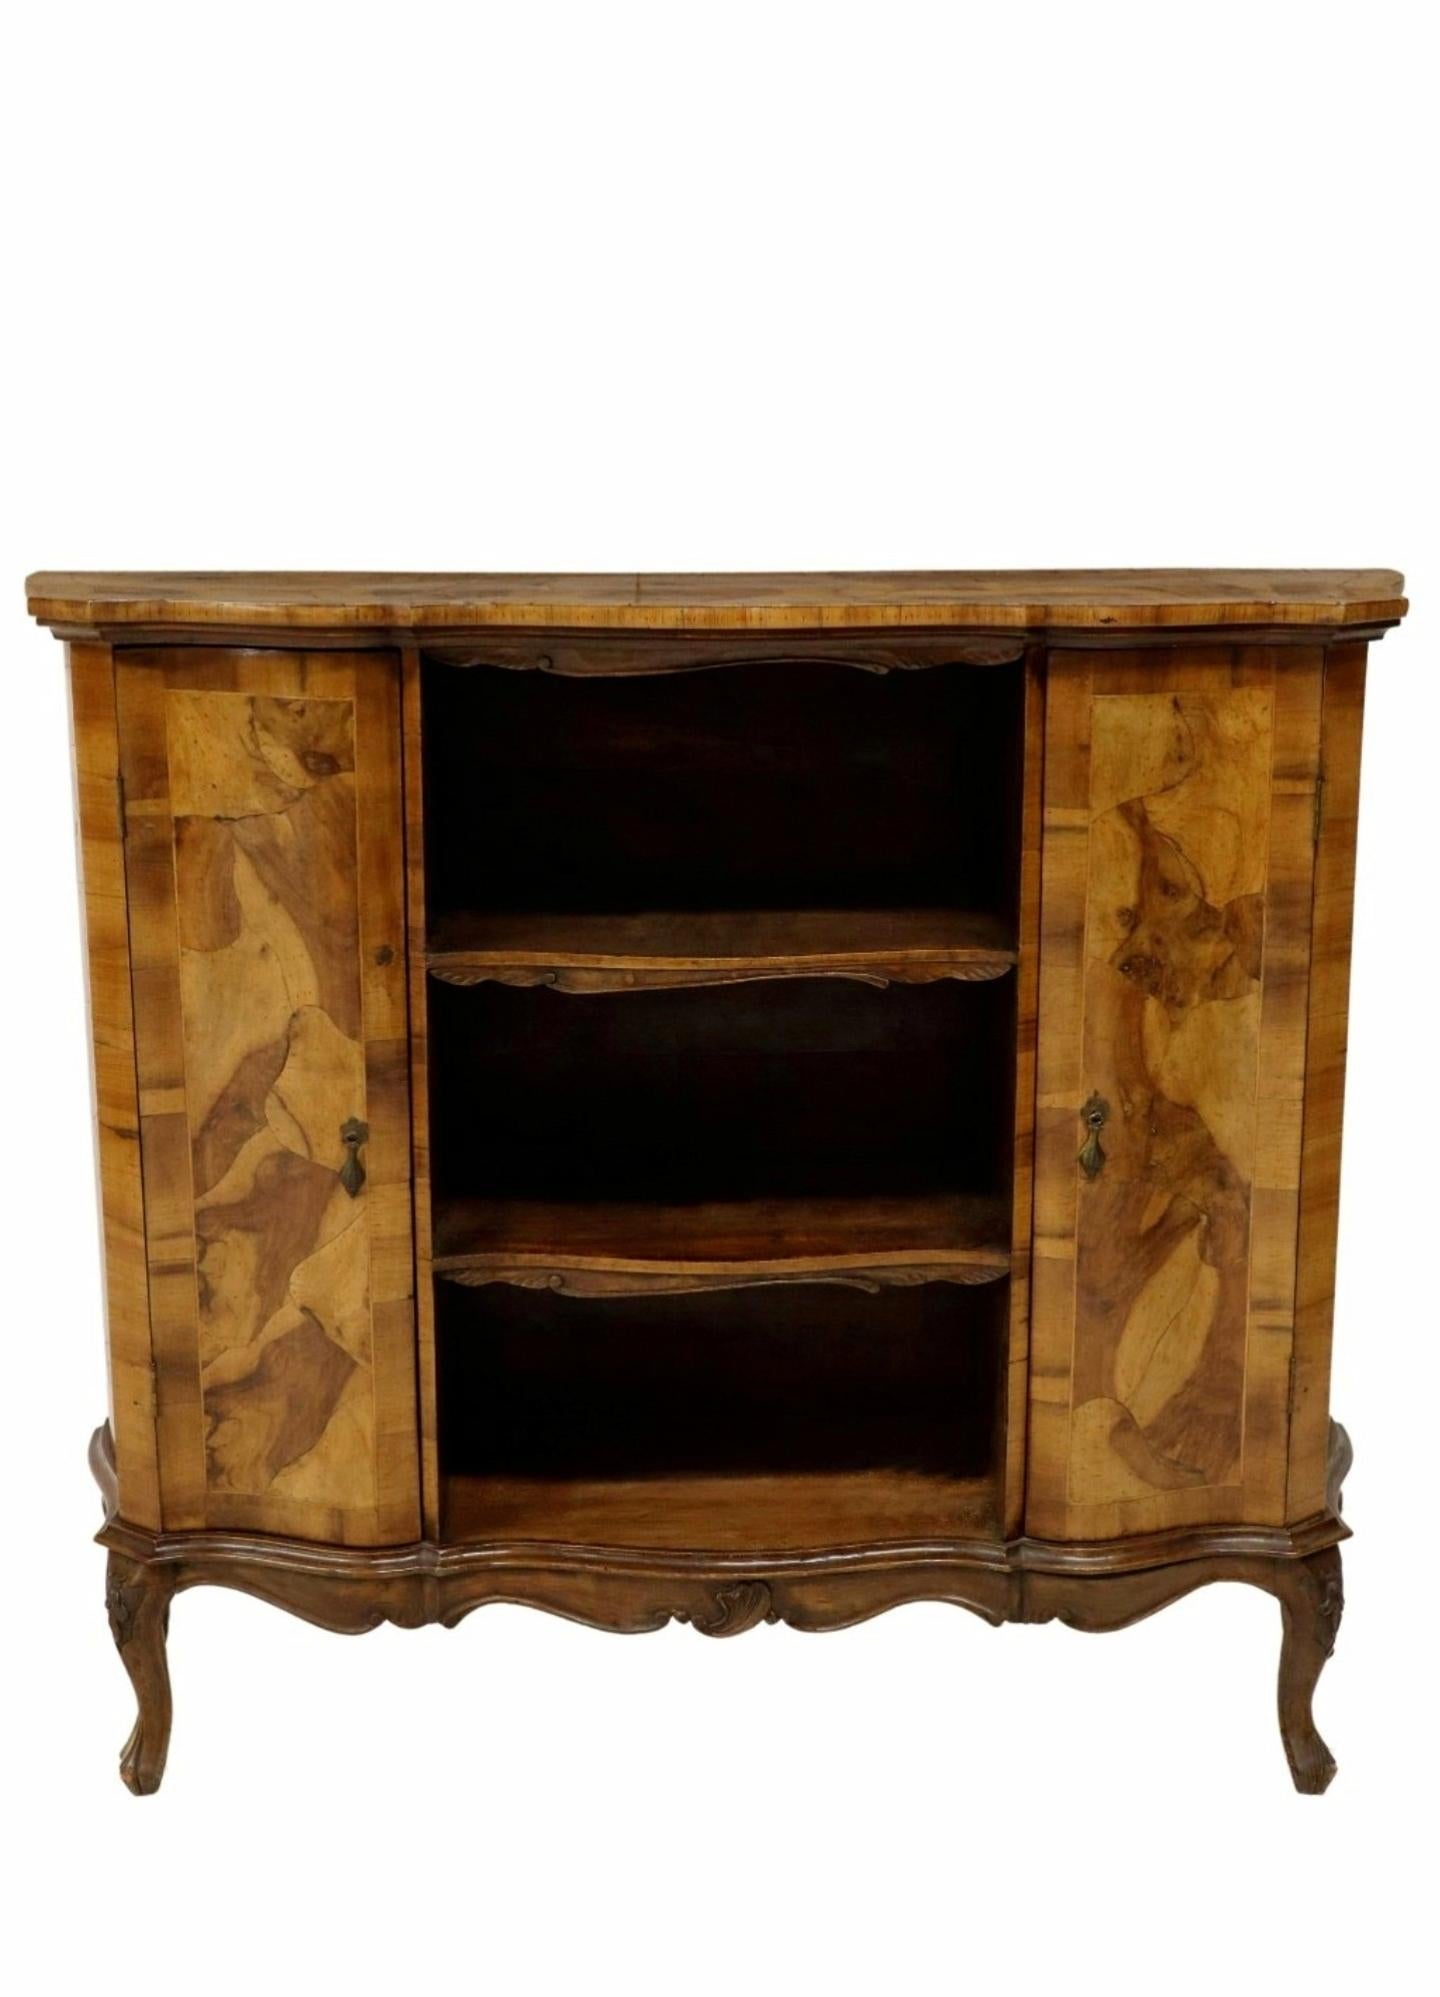 Elegant vintage Italian patchwork open bookcase or buffet. circa 1930s/1940s 

Hand-crafted in Venice, Italy in the early/mid-20th century, featuring figured walnut, beech, maple, olive wood and burled walnut veneers set in a sophisticated patchwork